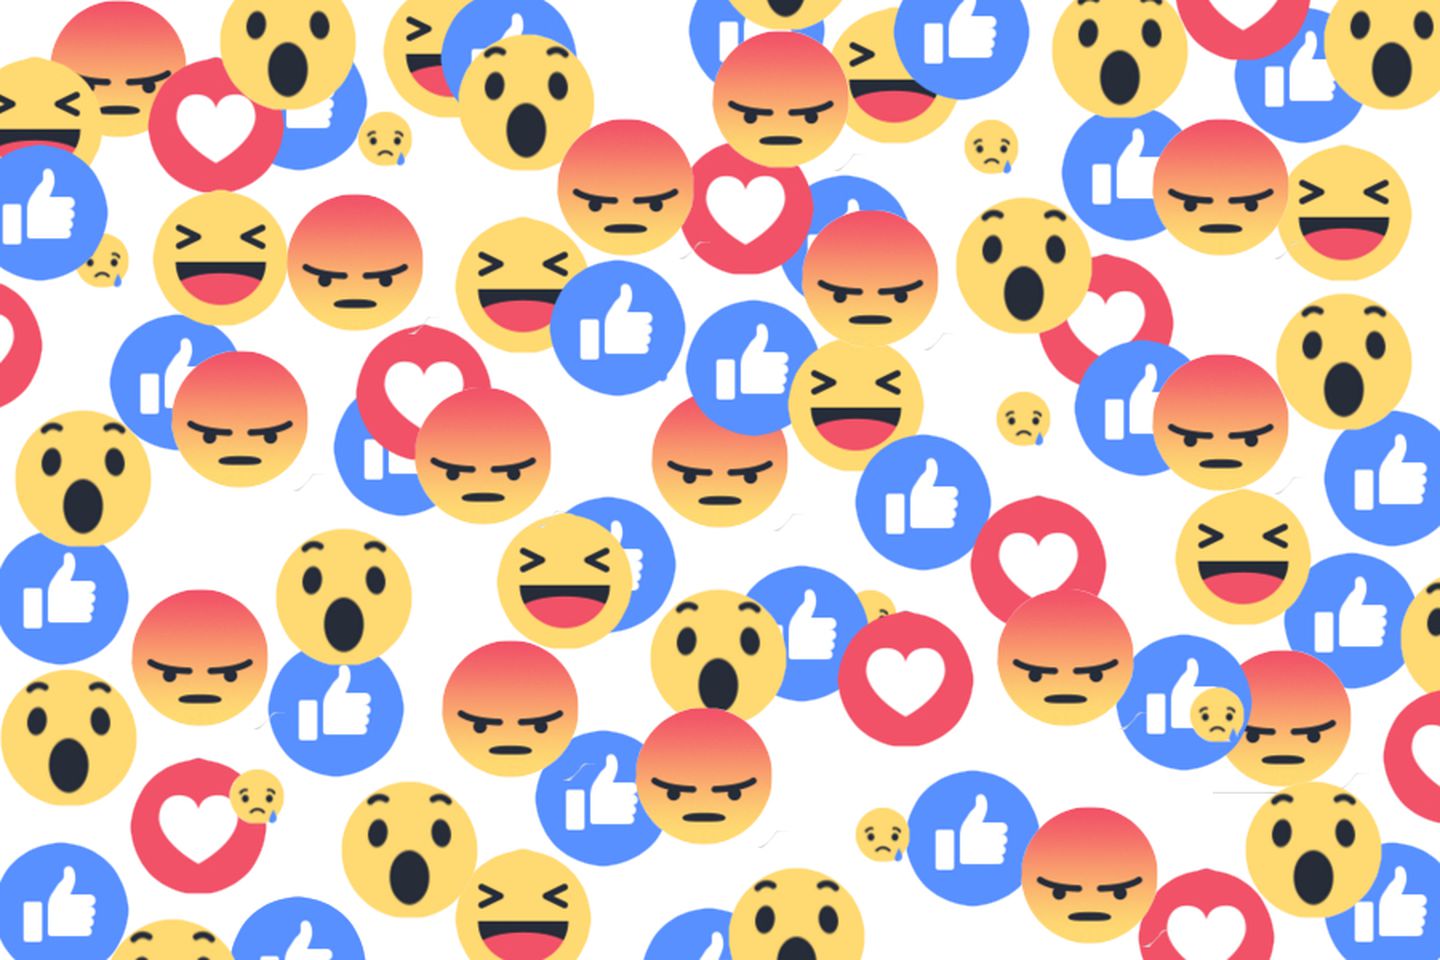 Facebook Reactions: how to make the most of six emoji - The Verge